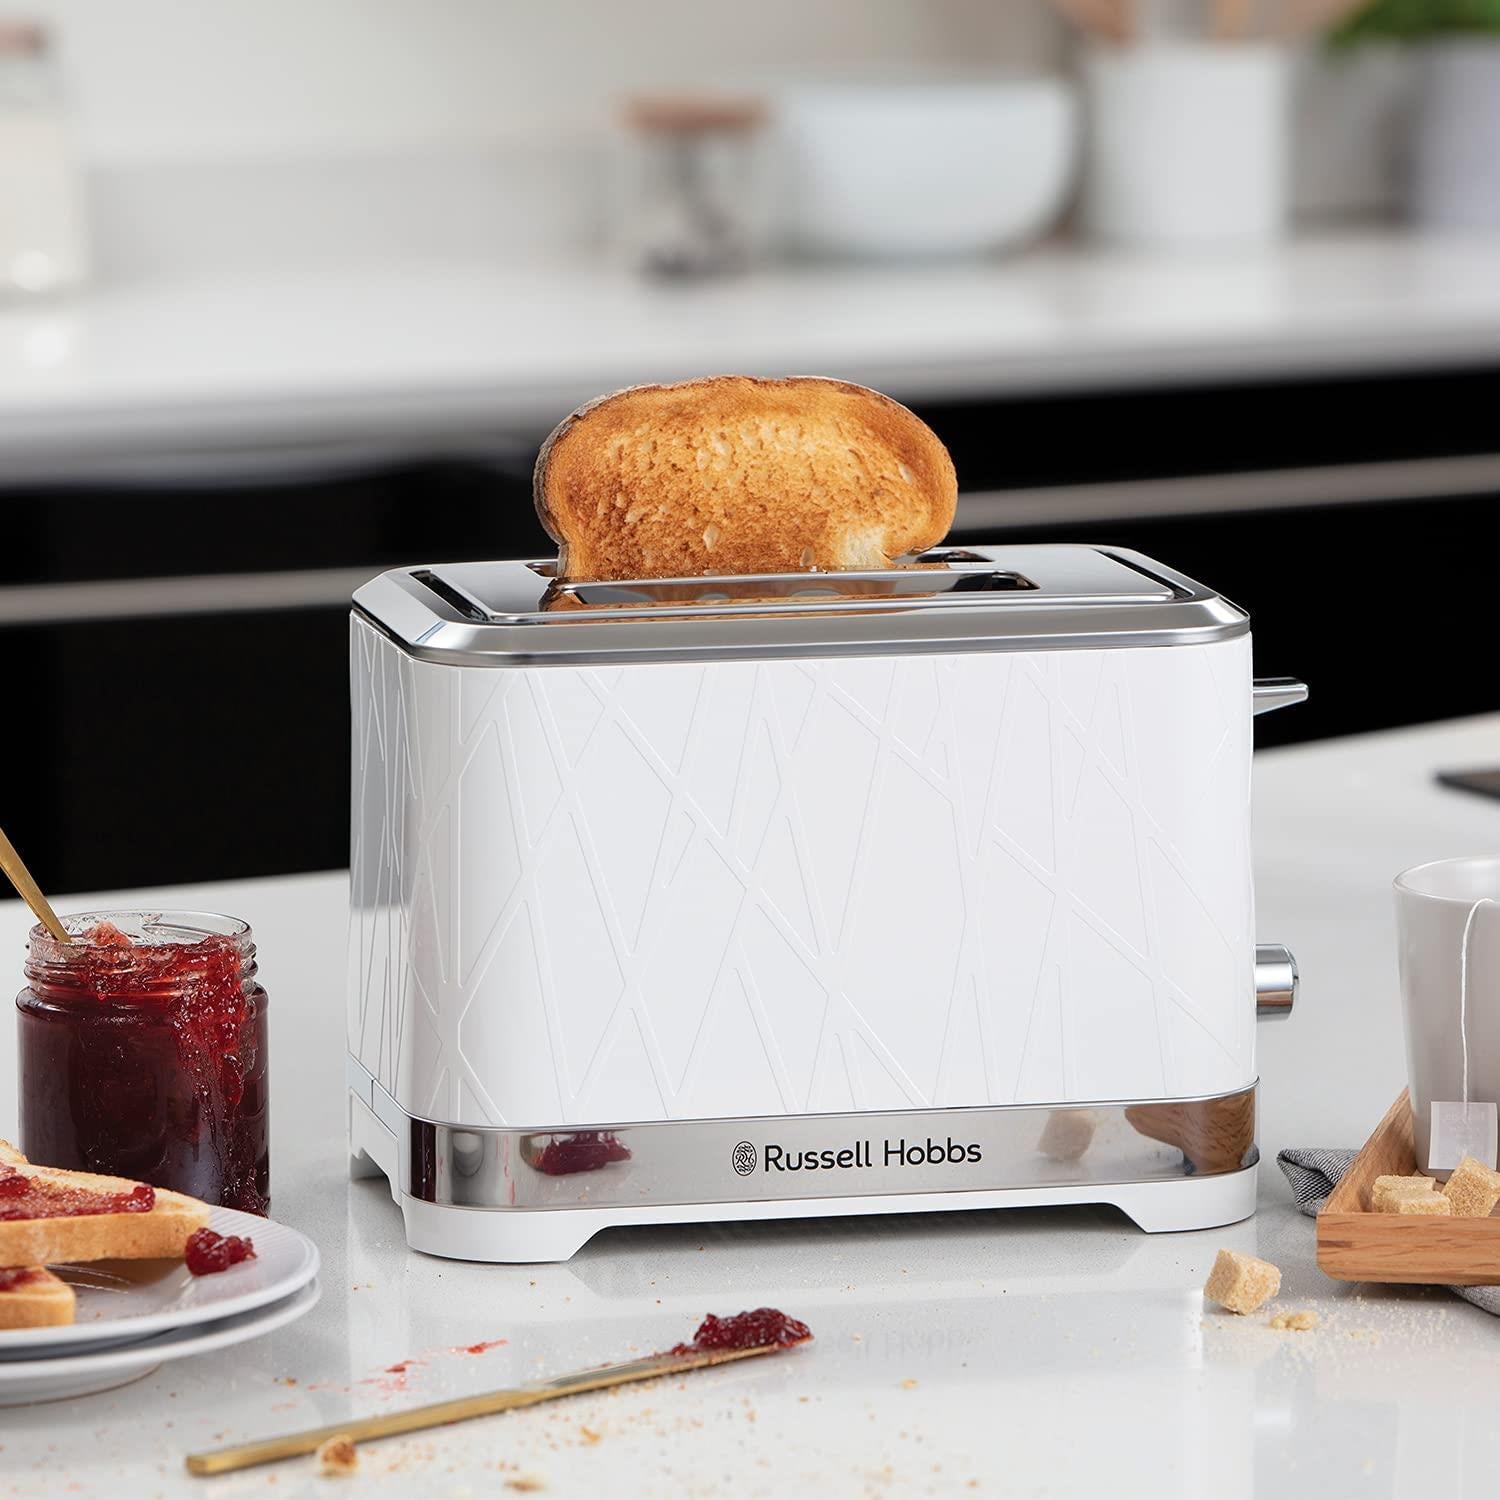 Russell Hobbs Structure 2 Slice Toaster Lift and Look Settings White - 28090